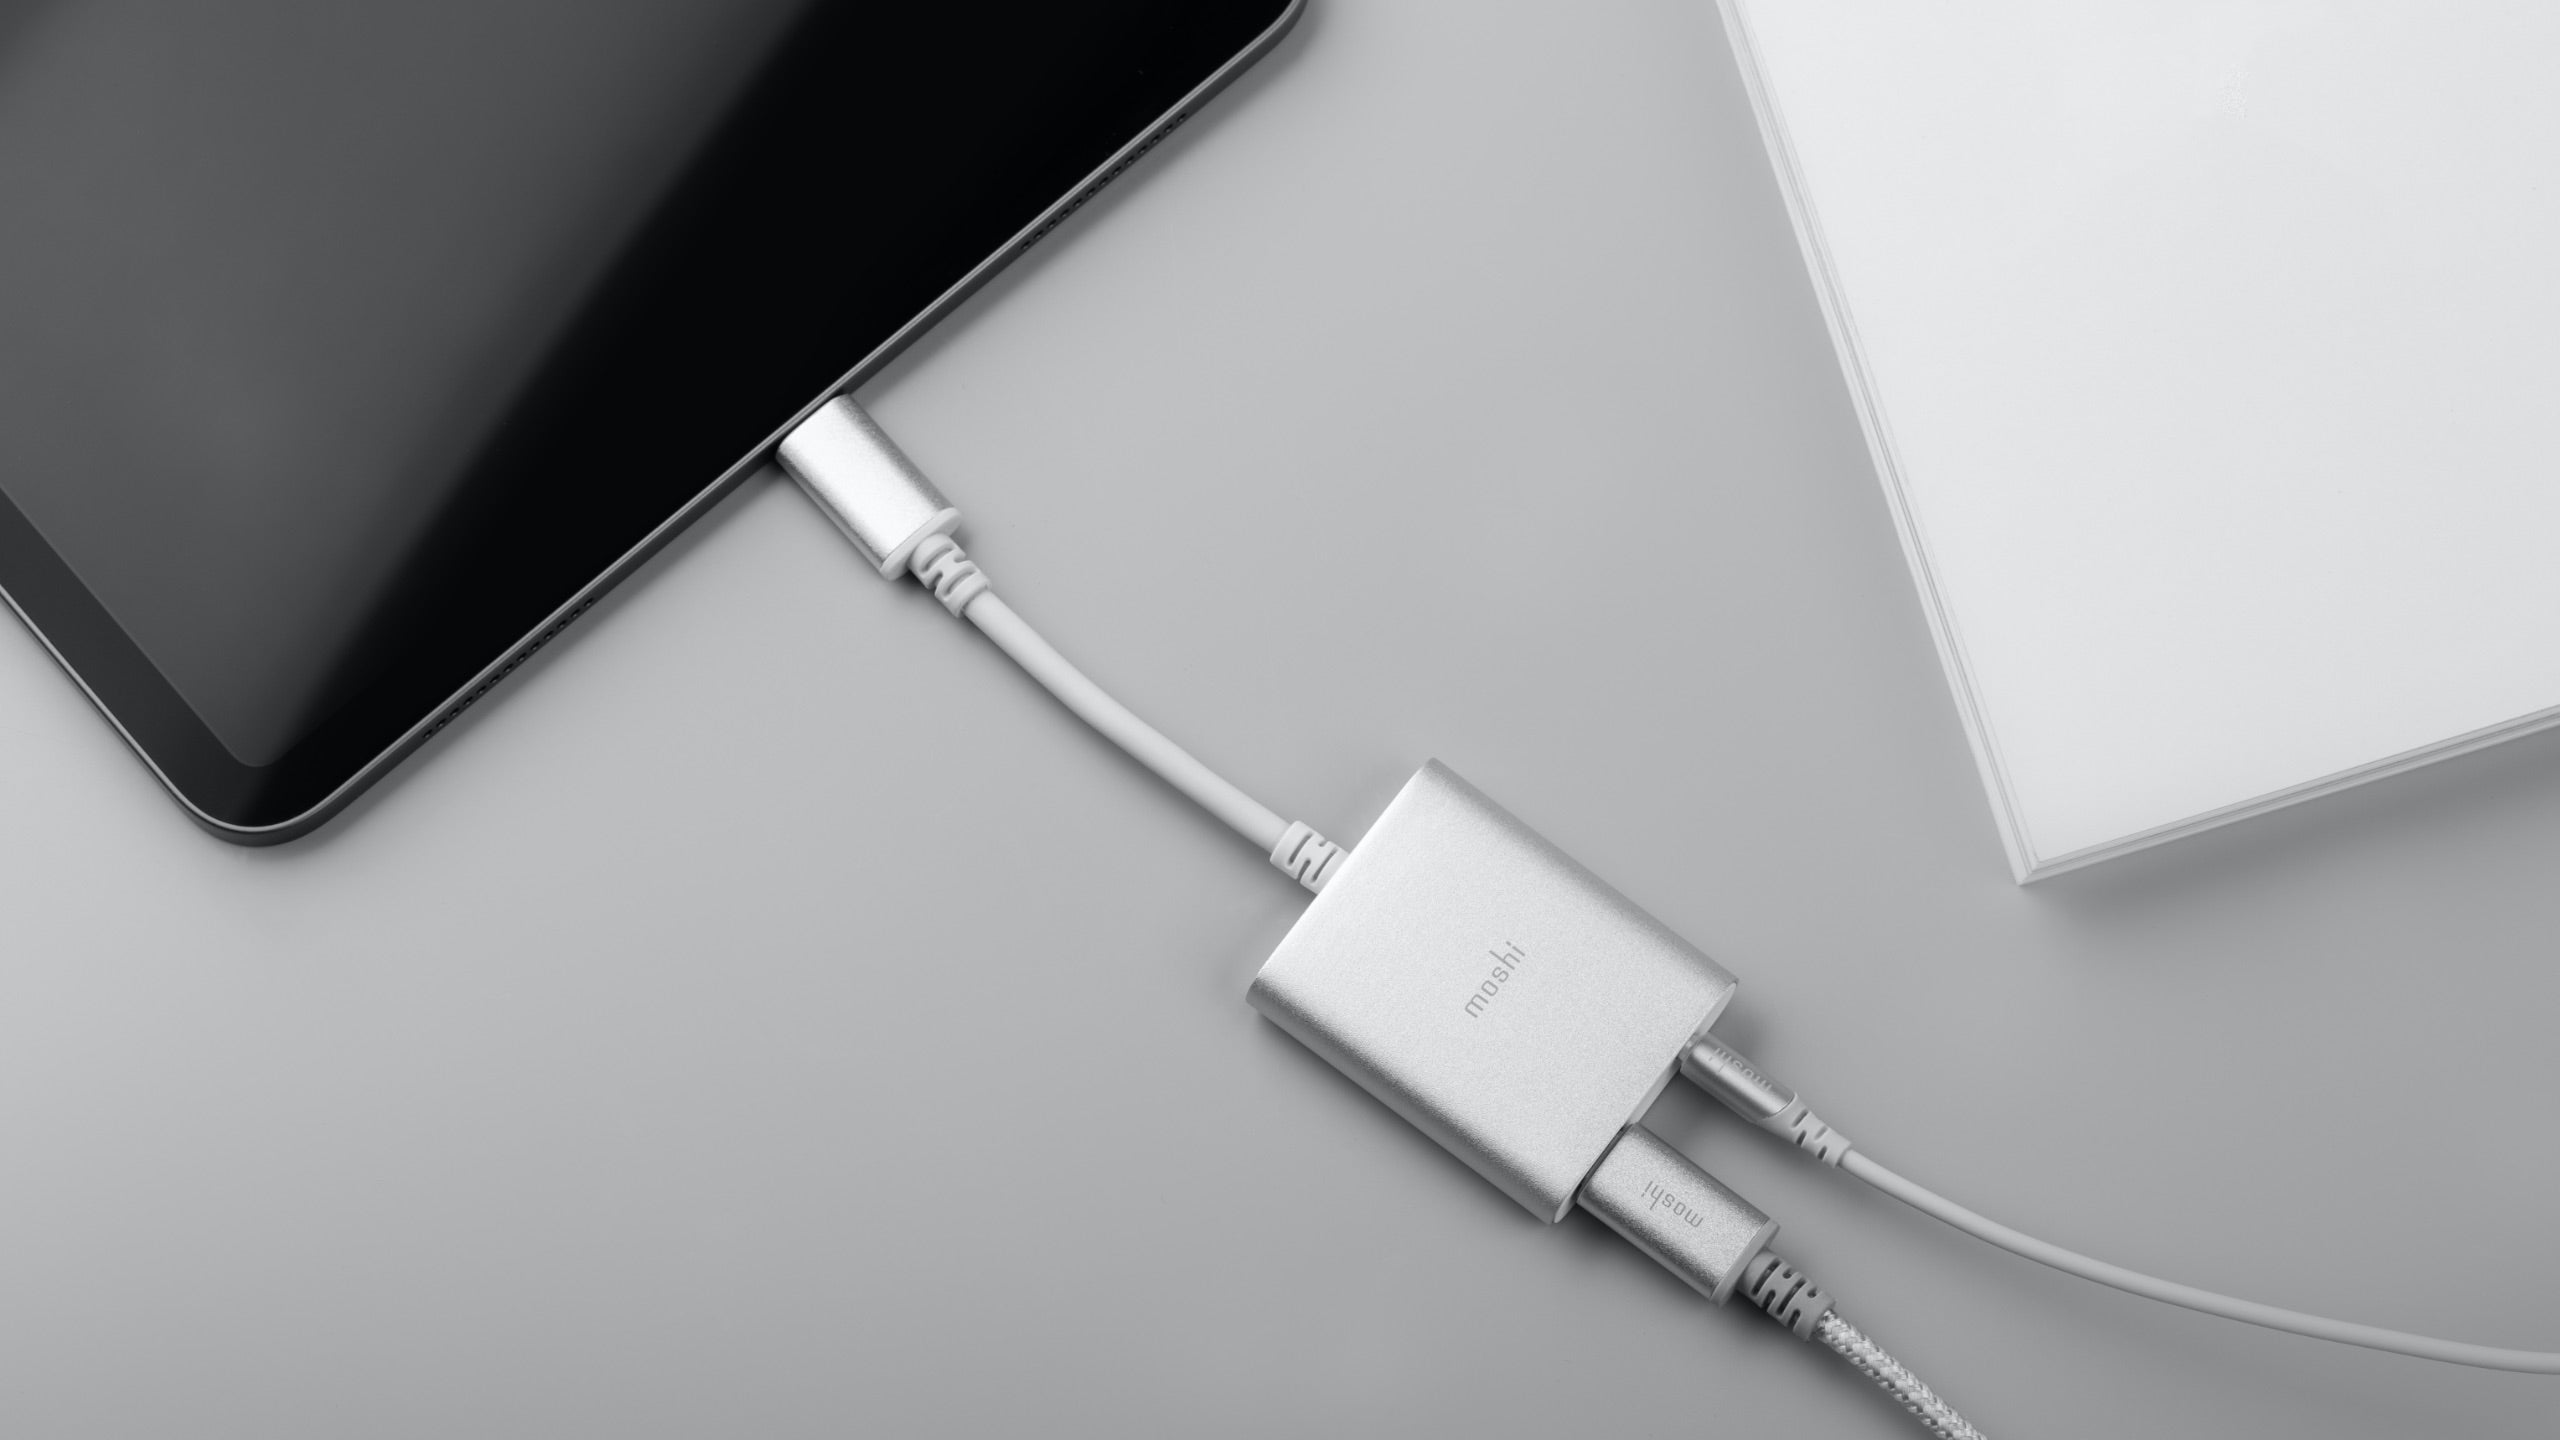 USB-C Digital Audio Adapter with Charging – (US)